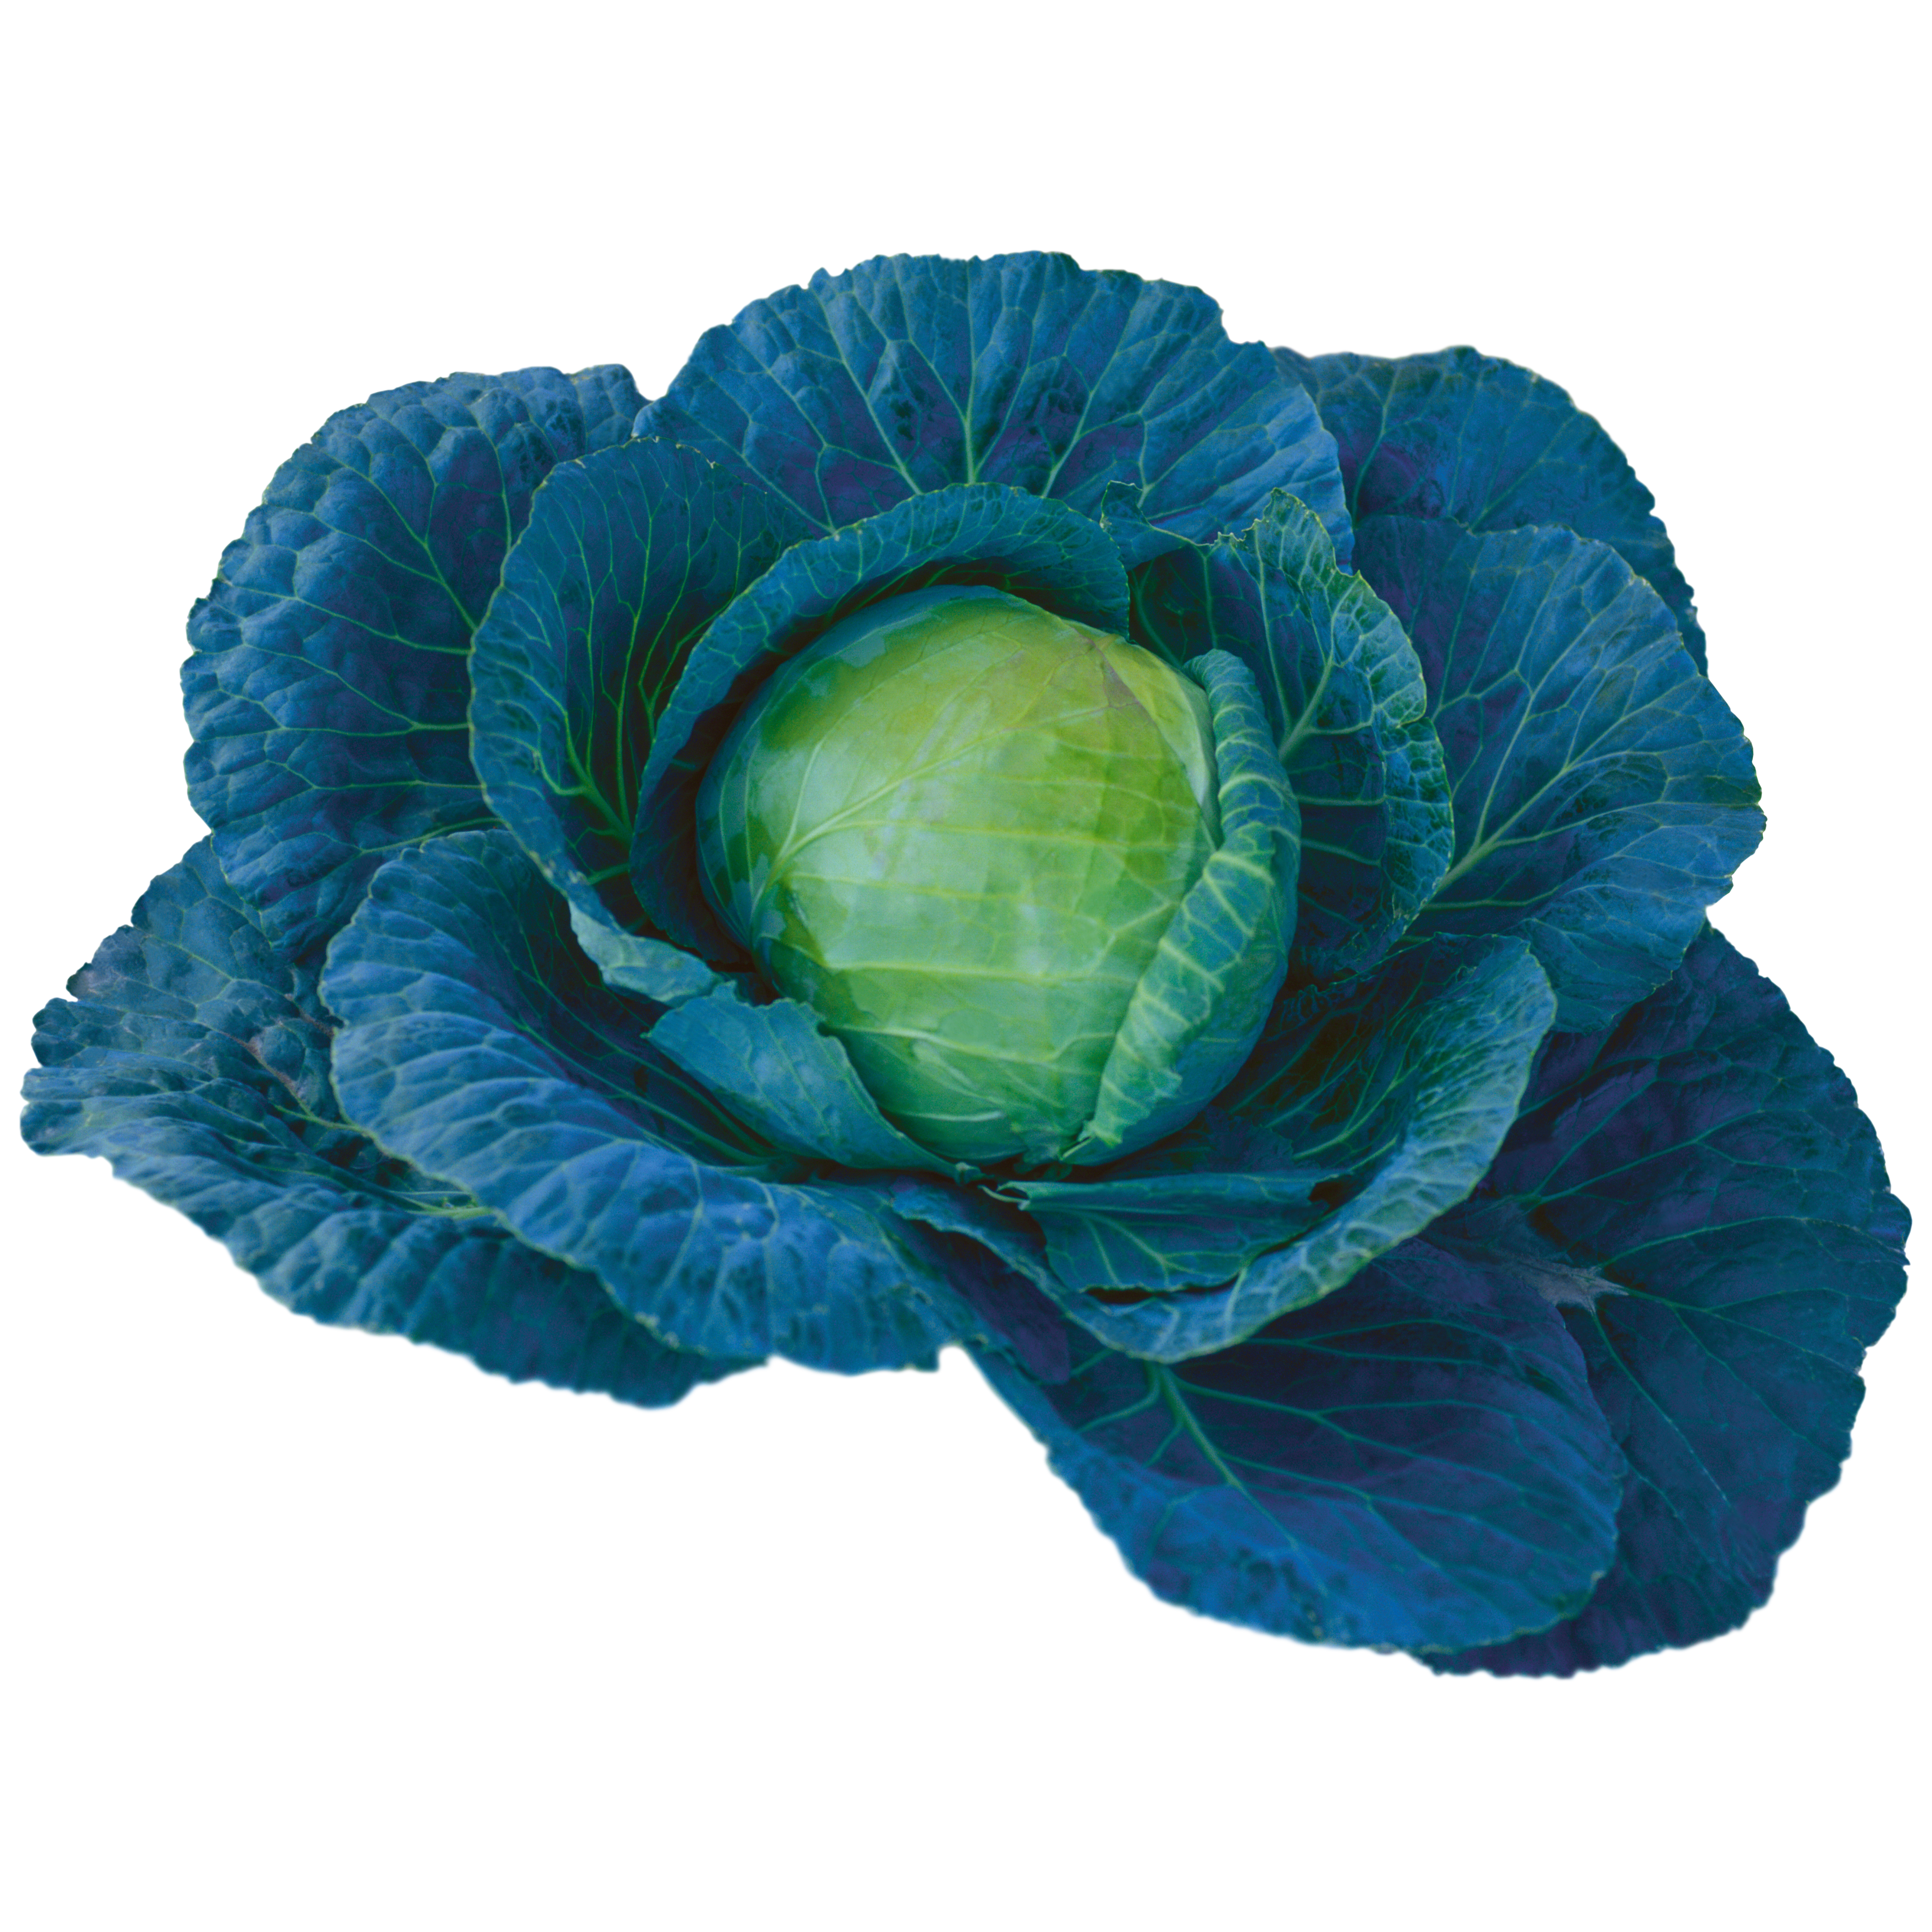 Cabbage Transparent Gallery